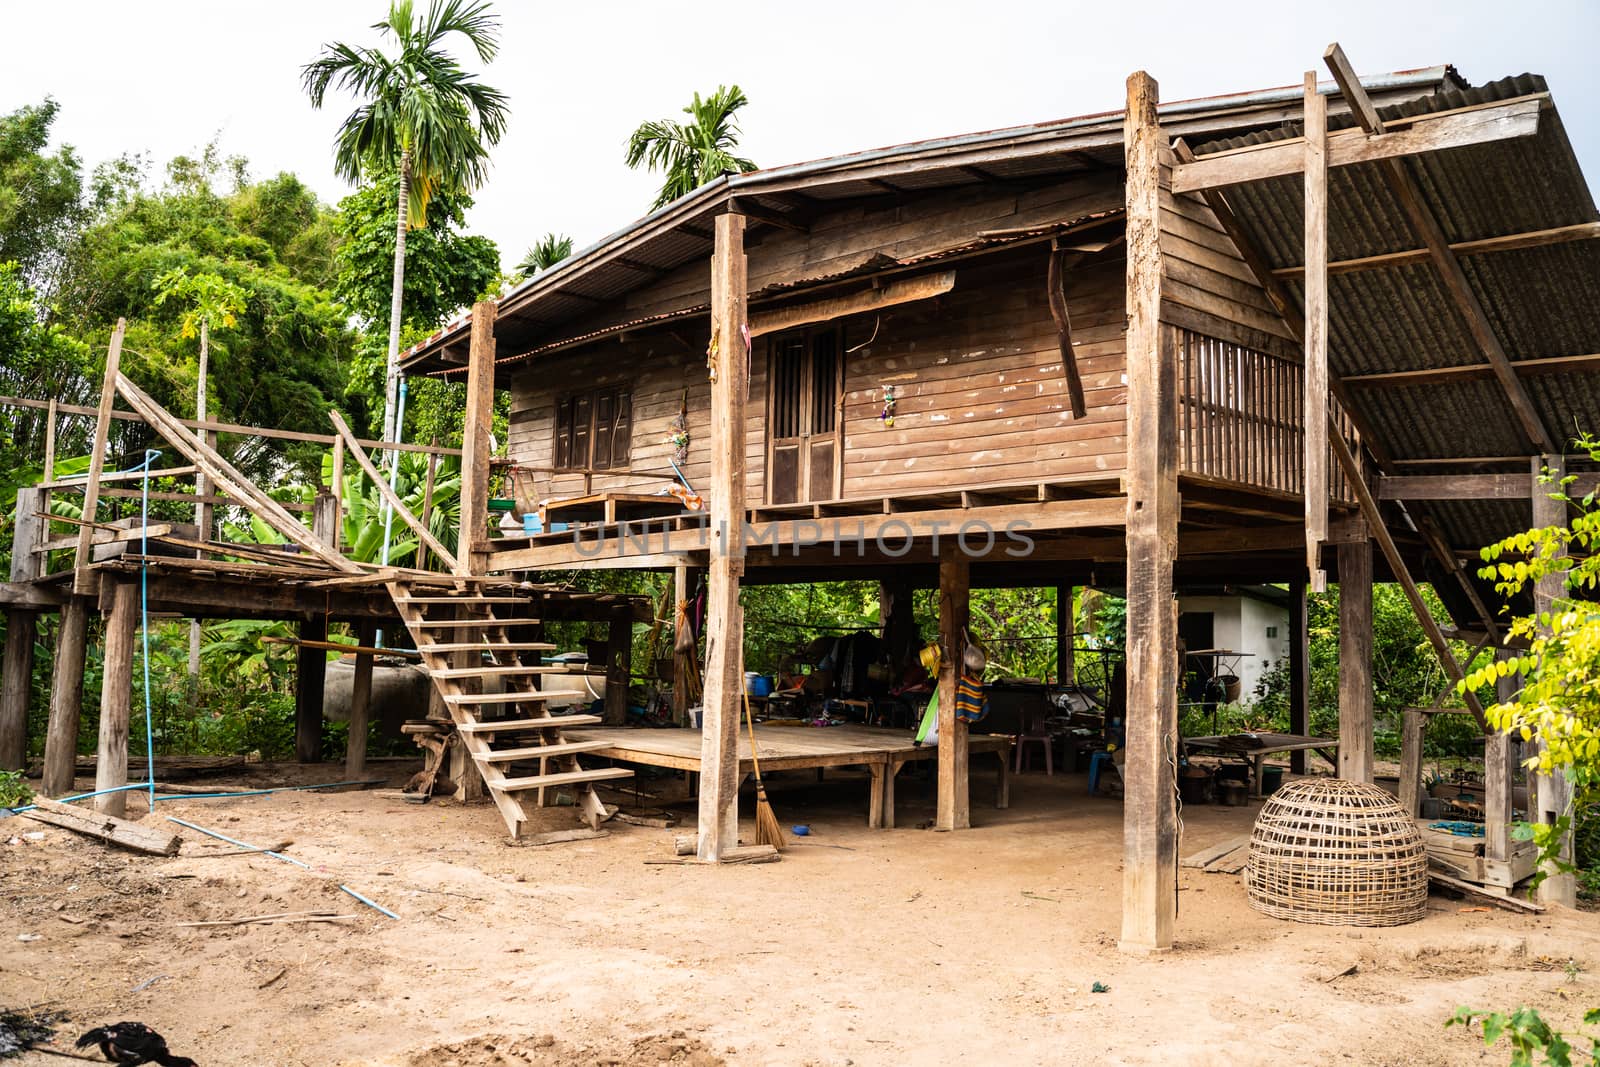 traditional houses of the native people of Thailand in village by peerapixs